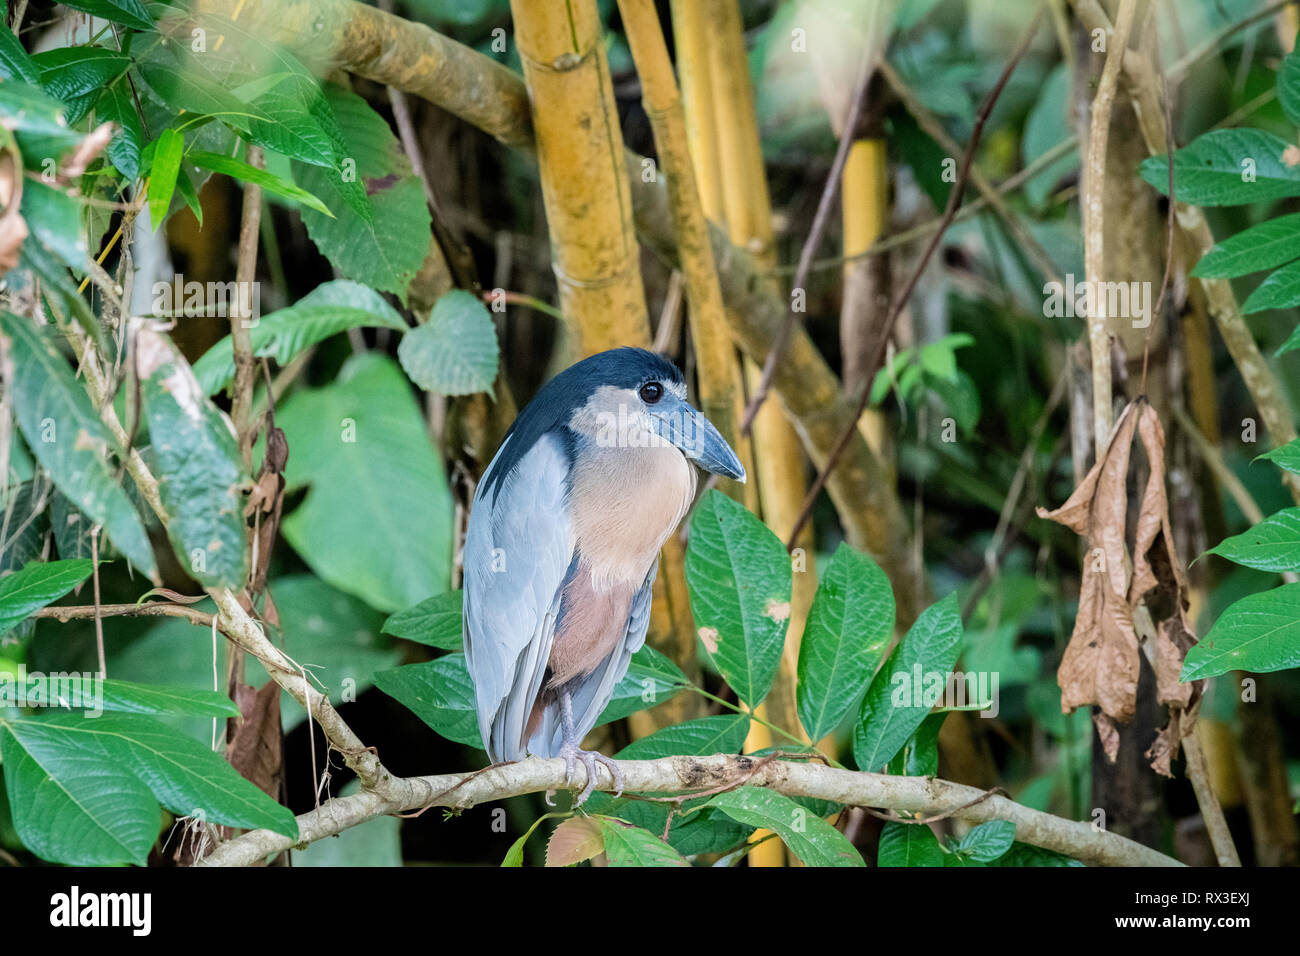 With its massive broad scoop-like bill and very big eyes the Boat-billed Heron is the funniest-looking of all Costa Rican herons. The wading bird lives in small colonies, often hiding in thick cover. The oversized eyes are an adaptation to hunting at dawn and at night. Stock Photo